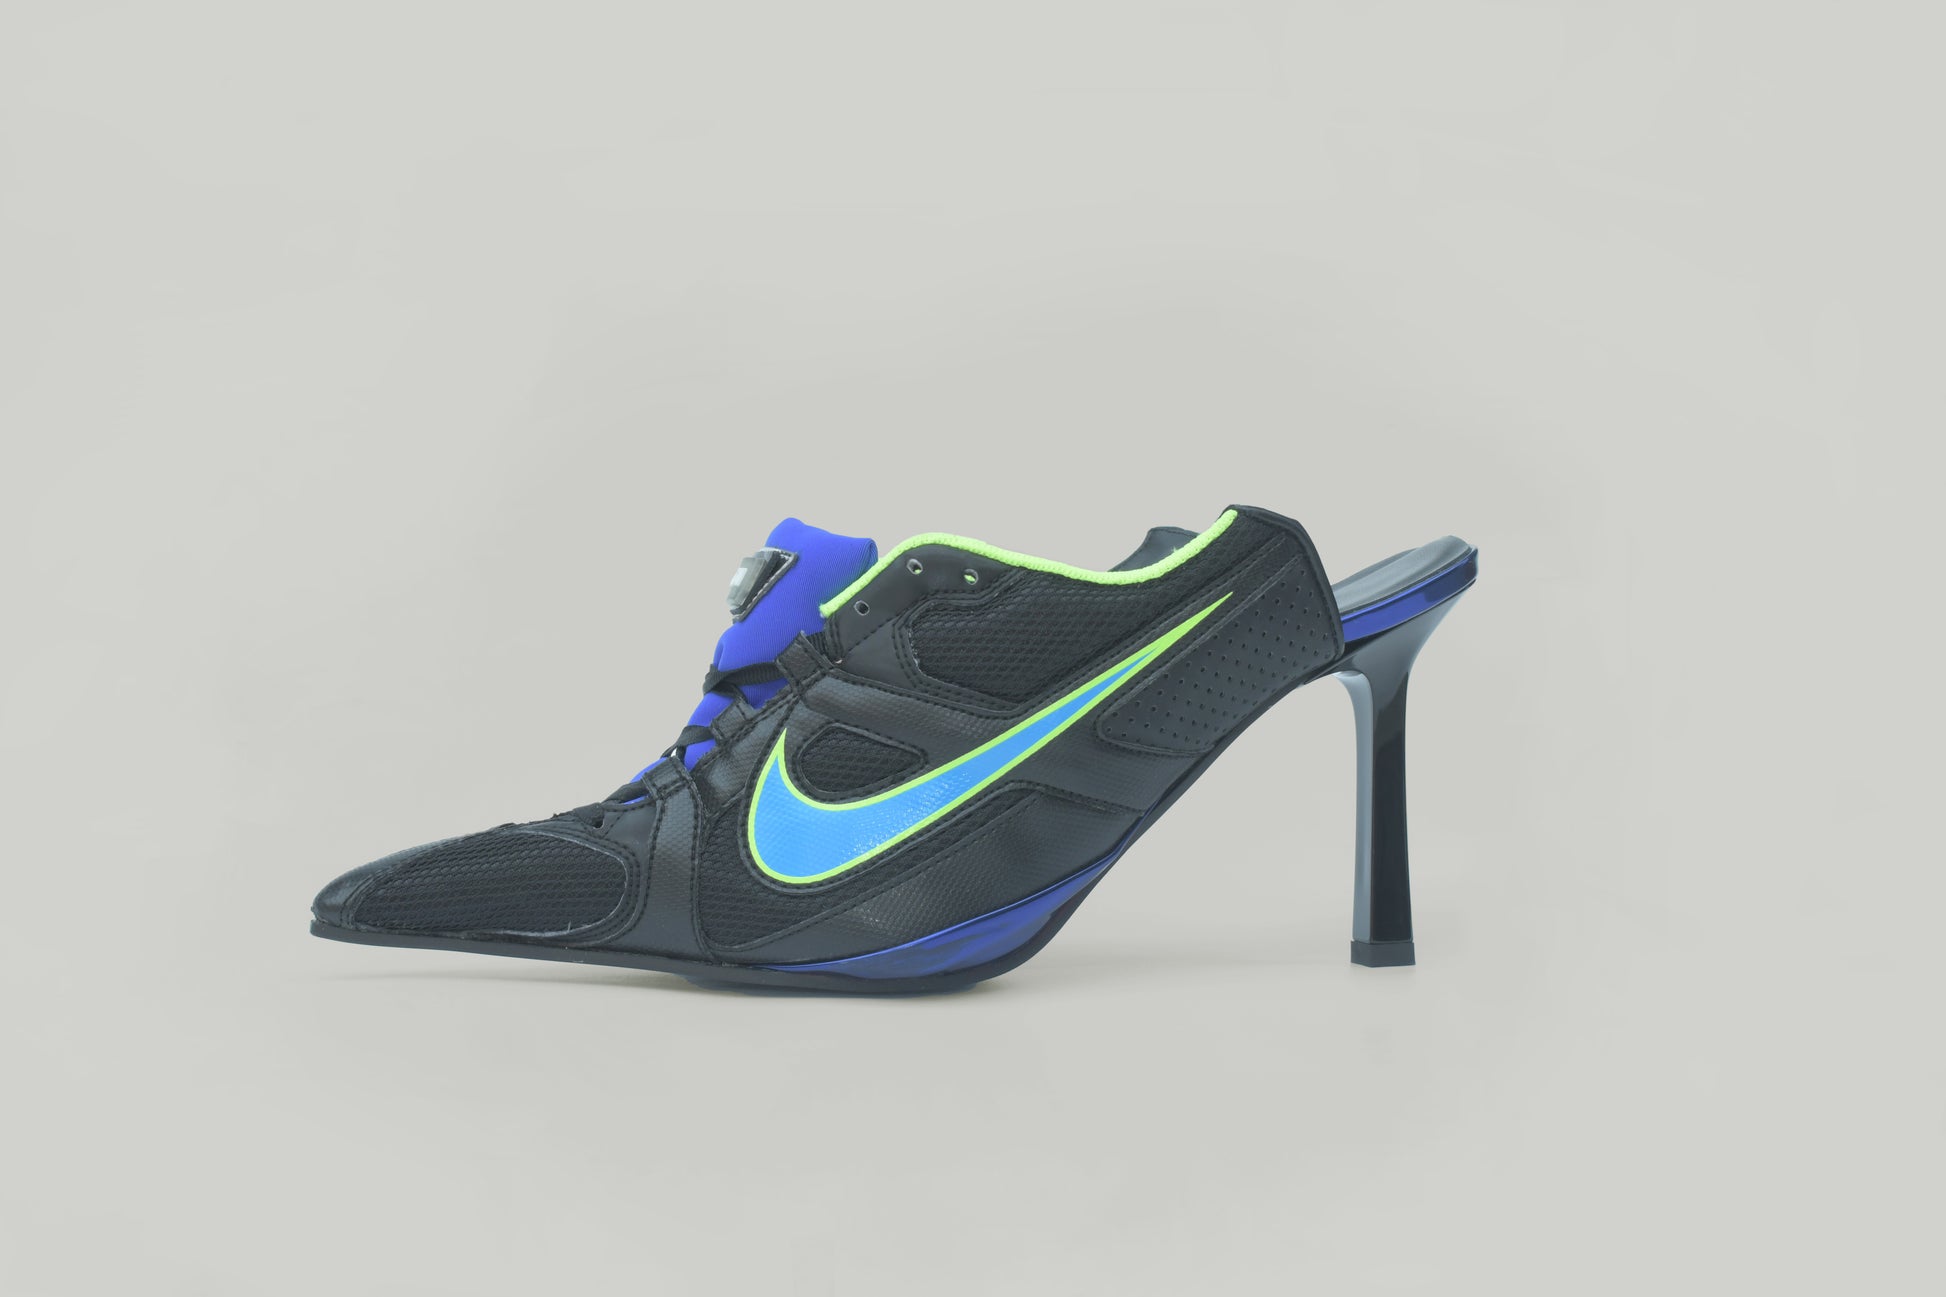 A photograph of the side view of Ancuta Sarca Olympia Heel Black shoe, WITH BLUE AND GREEN DETAILS, FRONT LACE-UP FASTENING, POINTED TOE, SLIP-ON STYLE, MADE IN ITALY